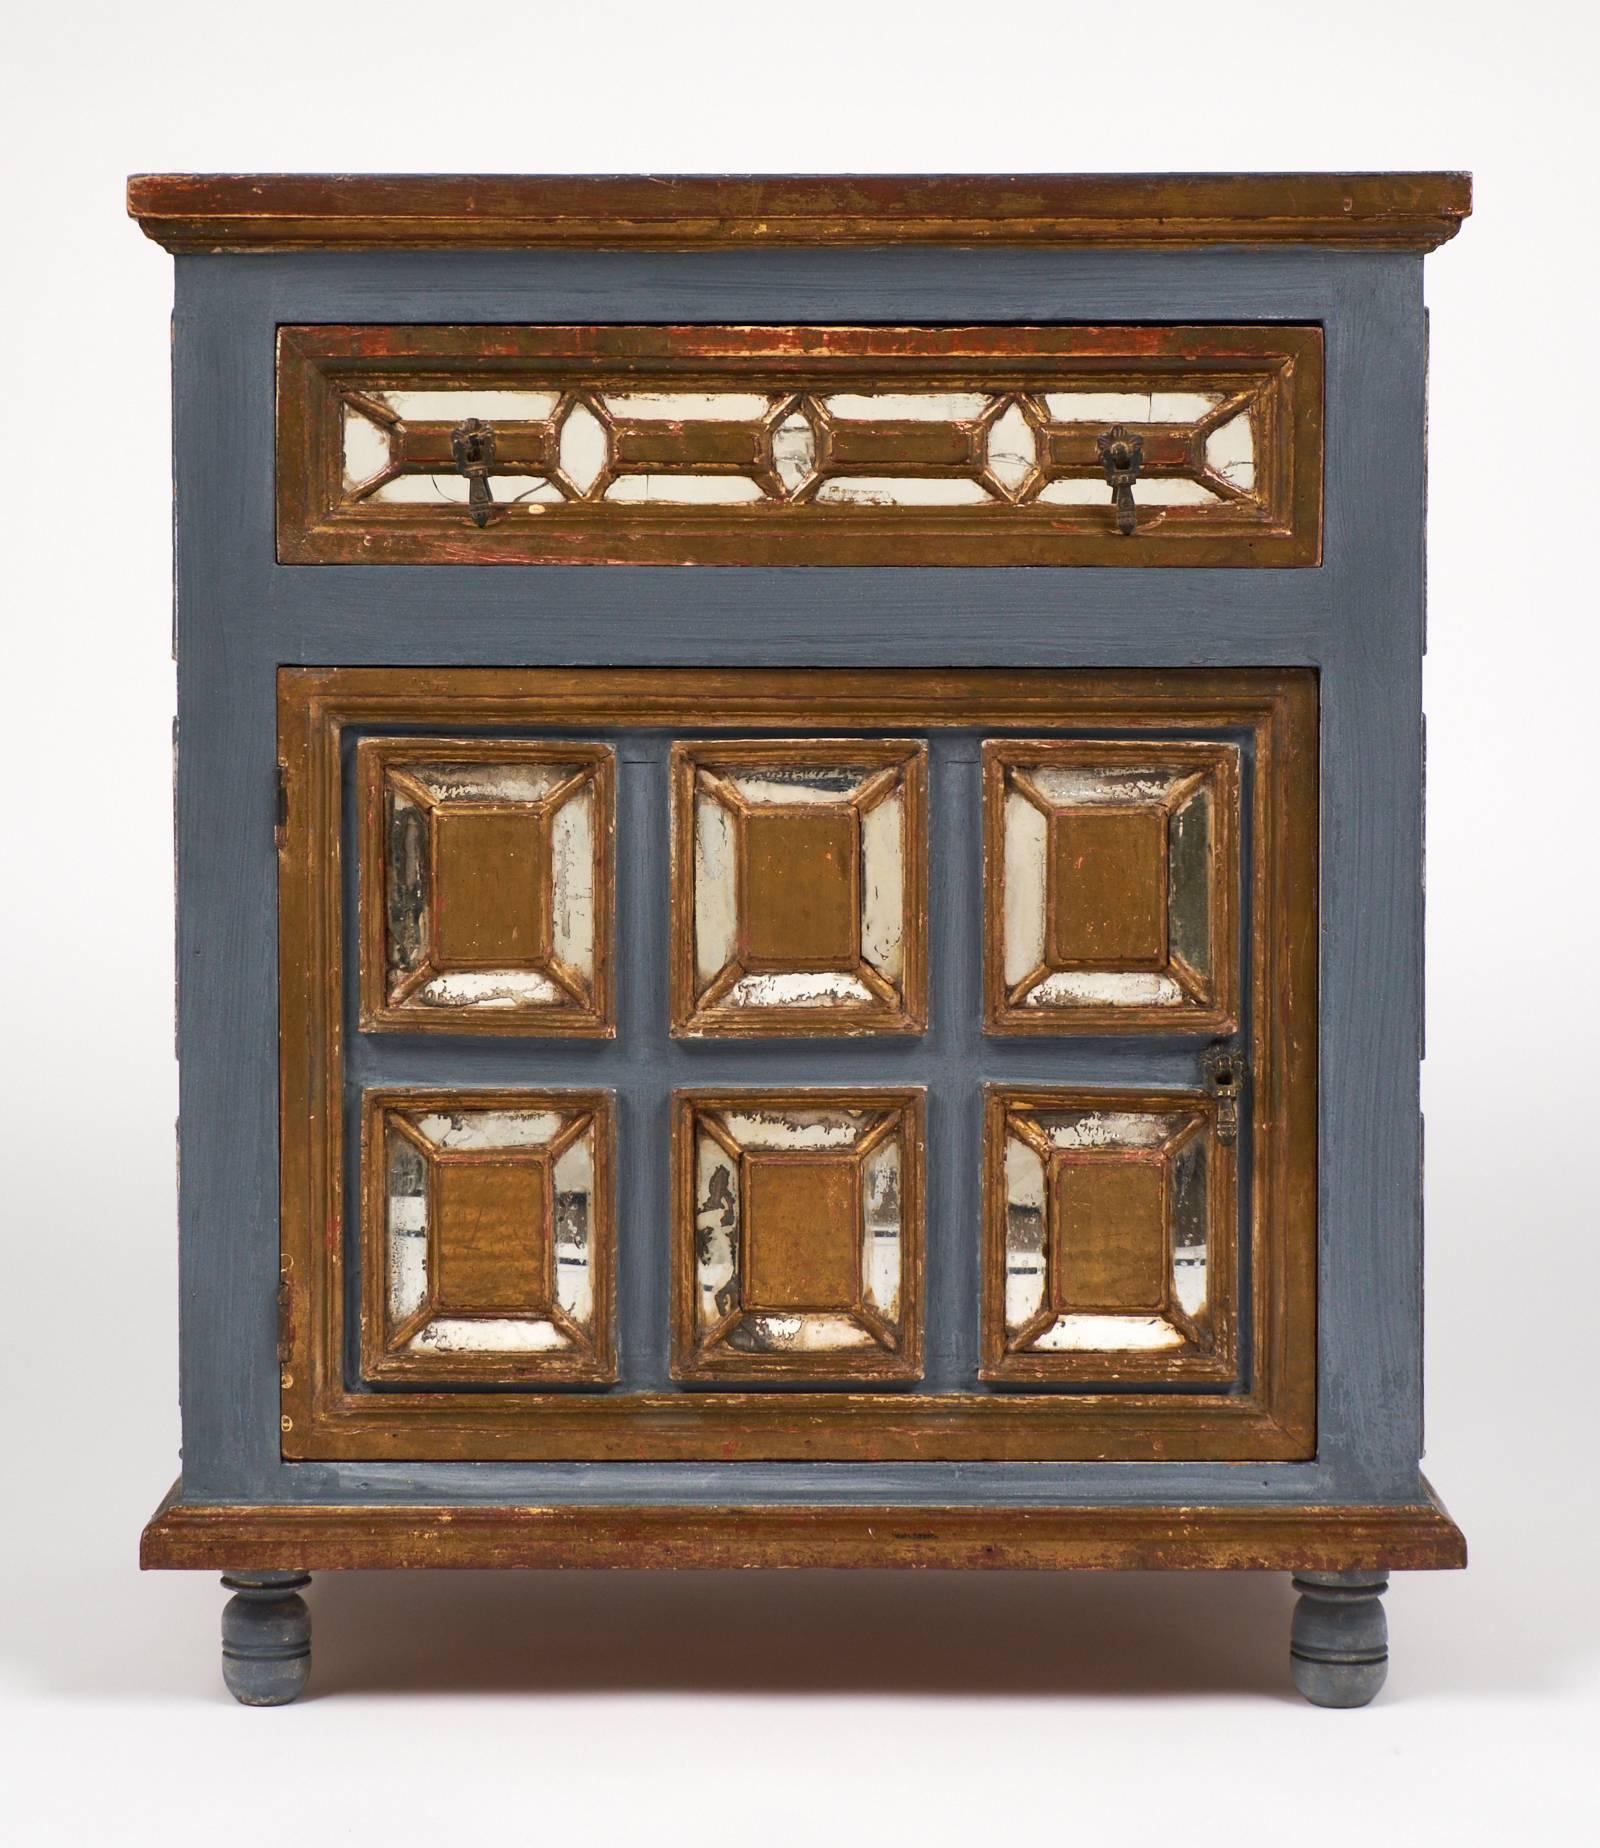 Antique Italian cabinet from Venice with one drawer and one door, original hardware, painted and finished with a sienna undertone gold leaf with mirrors inlaid in the moldings.
A coordinating piece is also available.